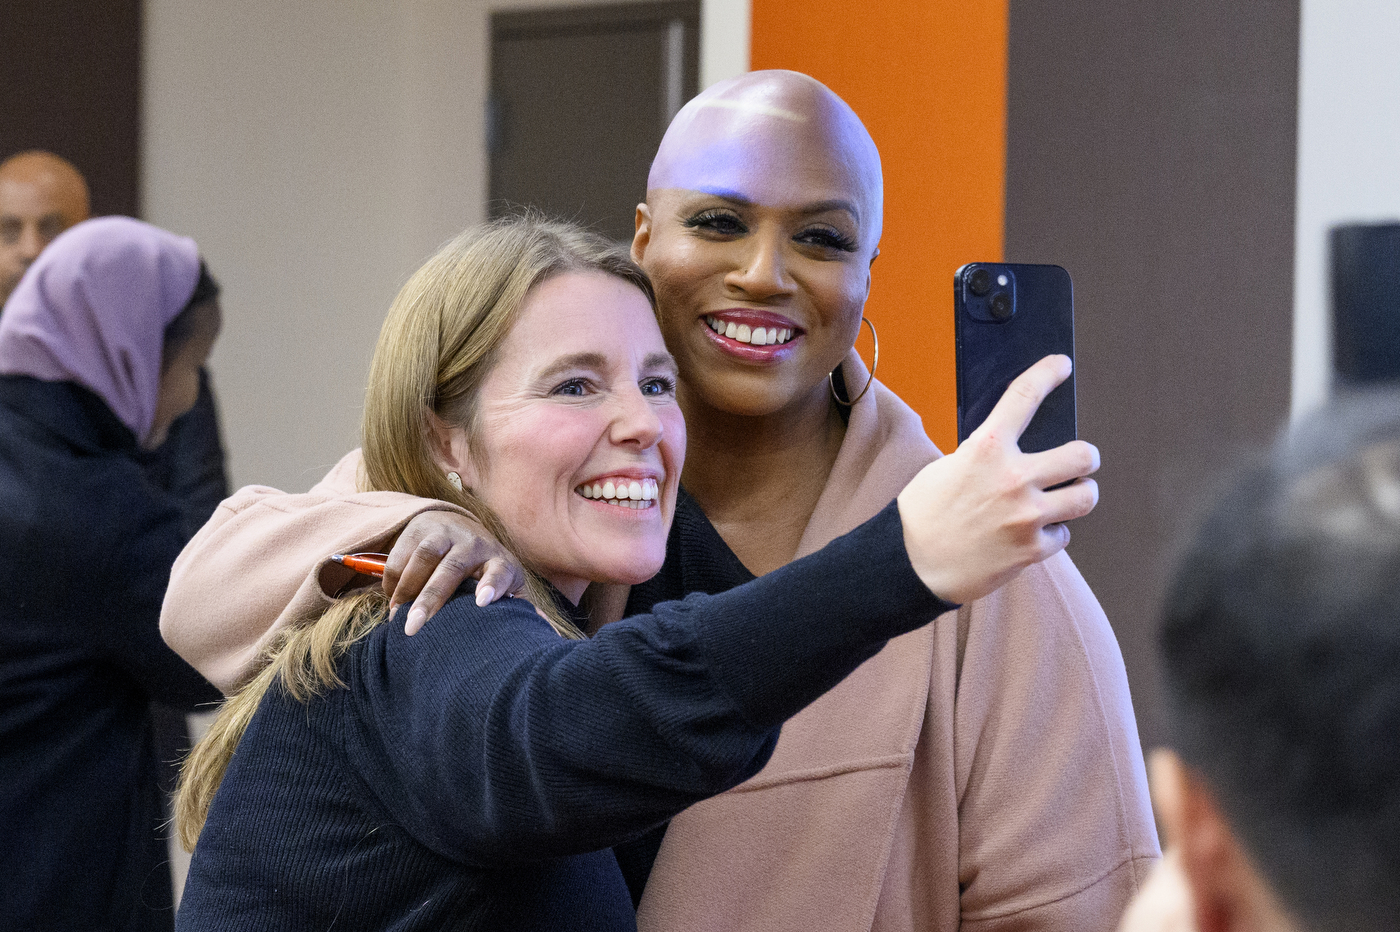 U.S. Rep. Ayanna Pressley posing for a selfie with someone else.